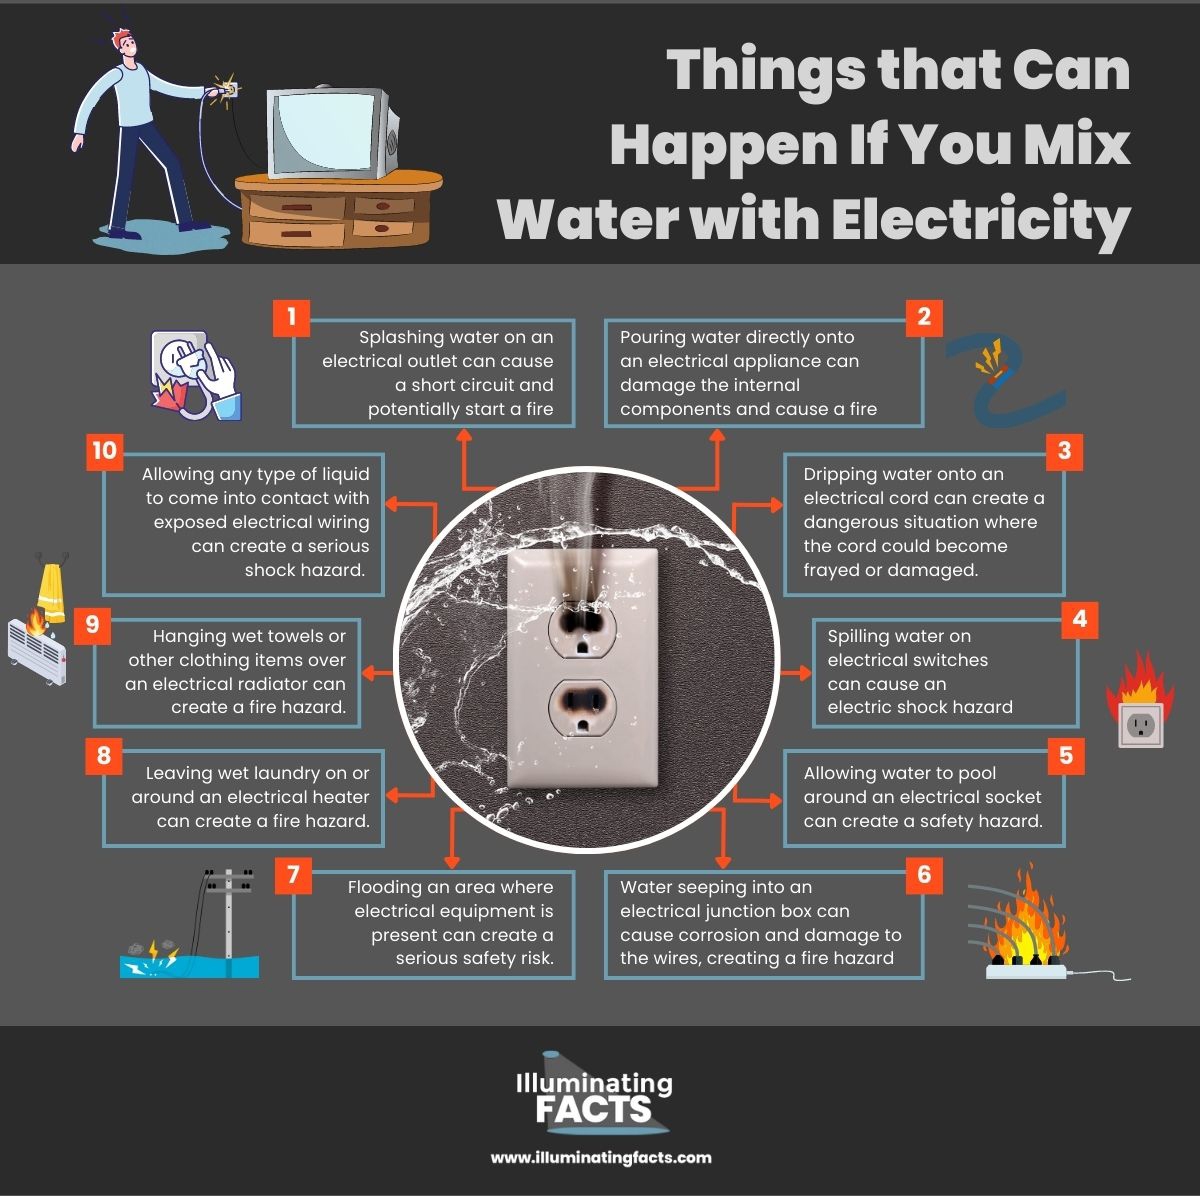 Things that Can Happen If You Mix Water with Electricity